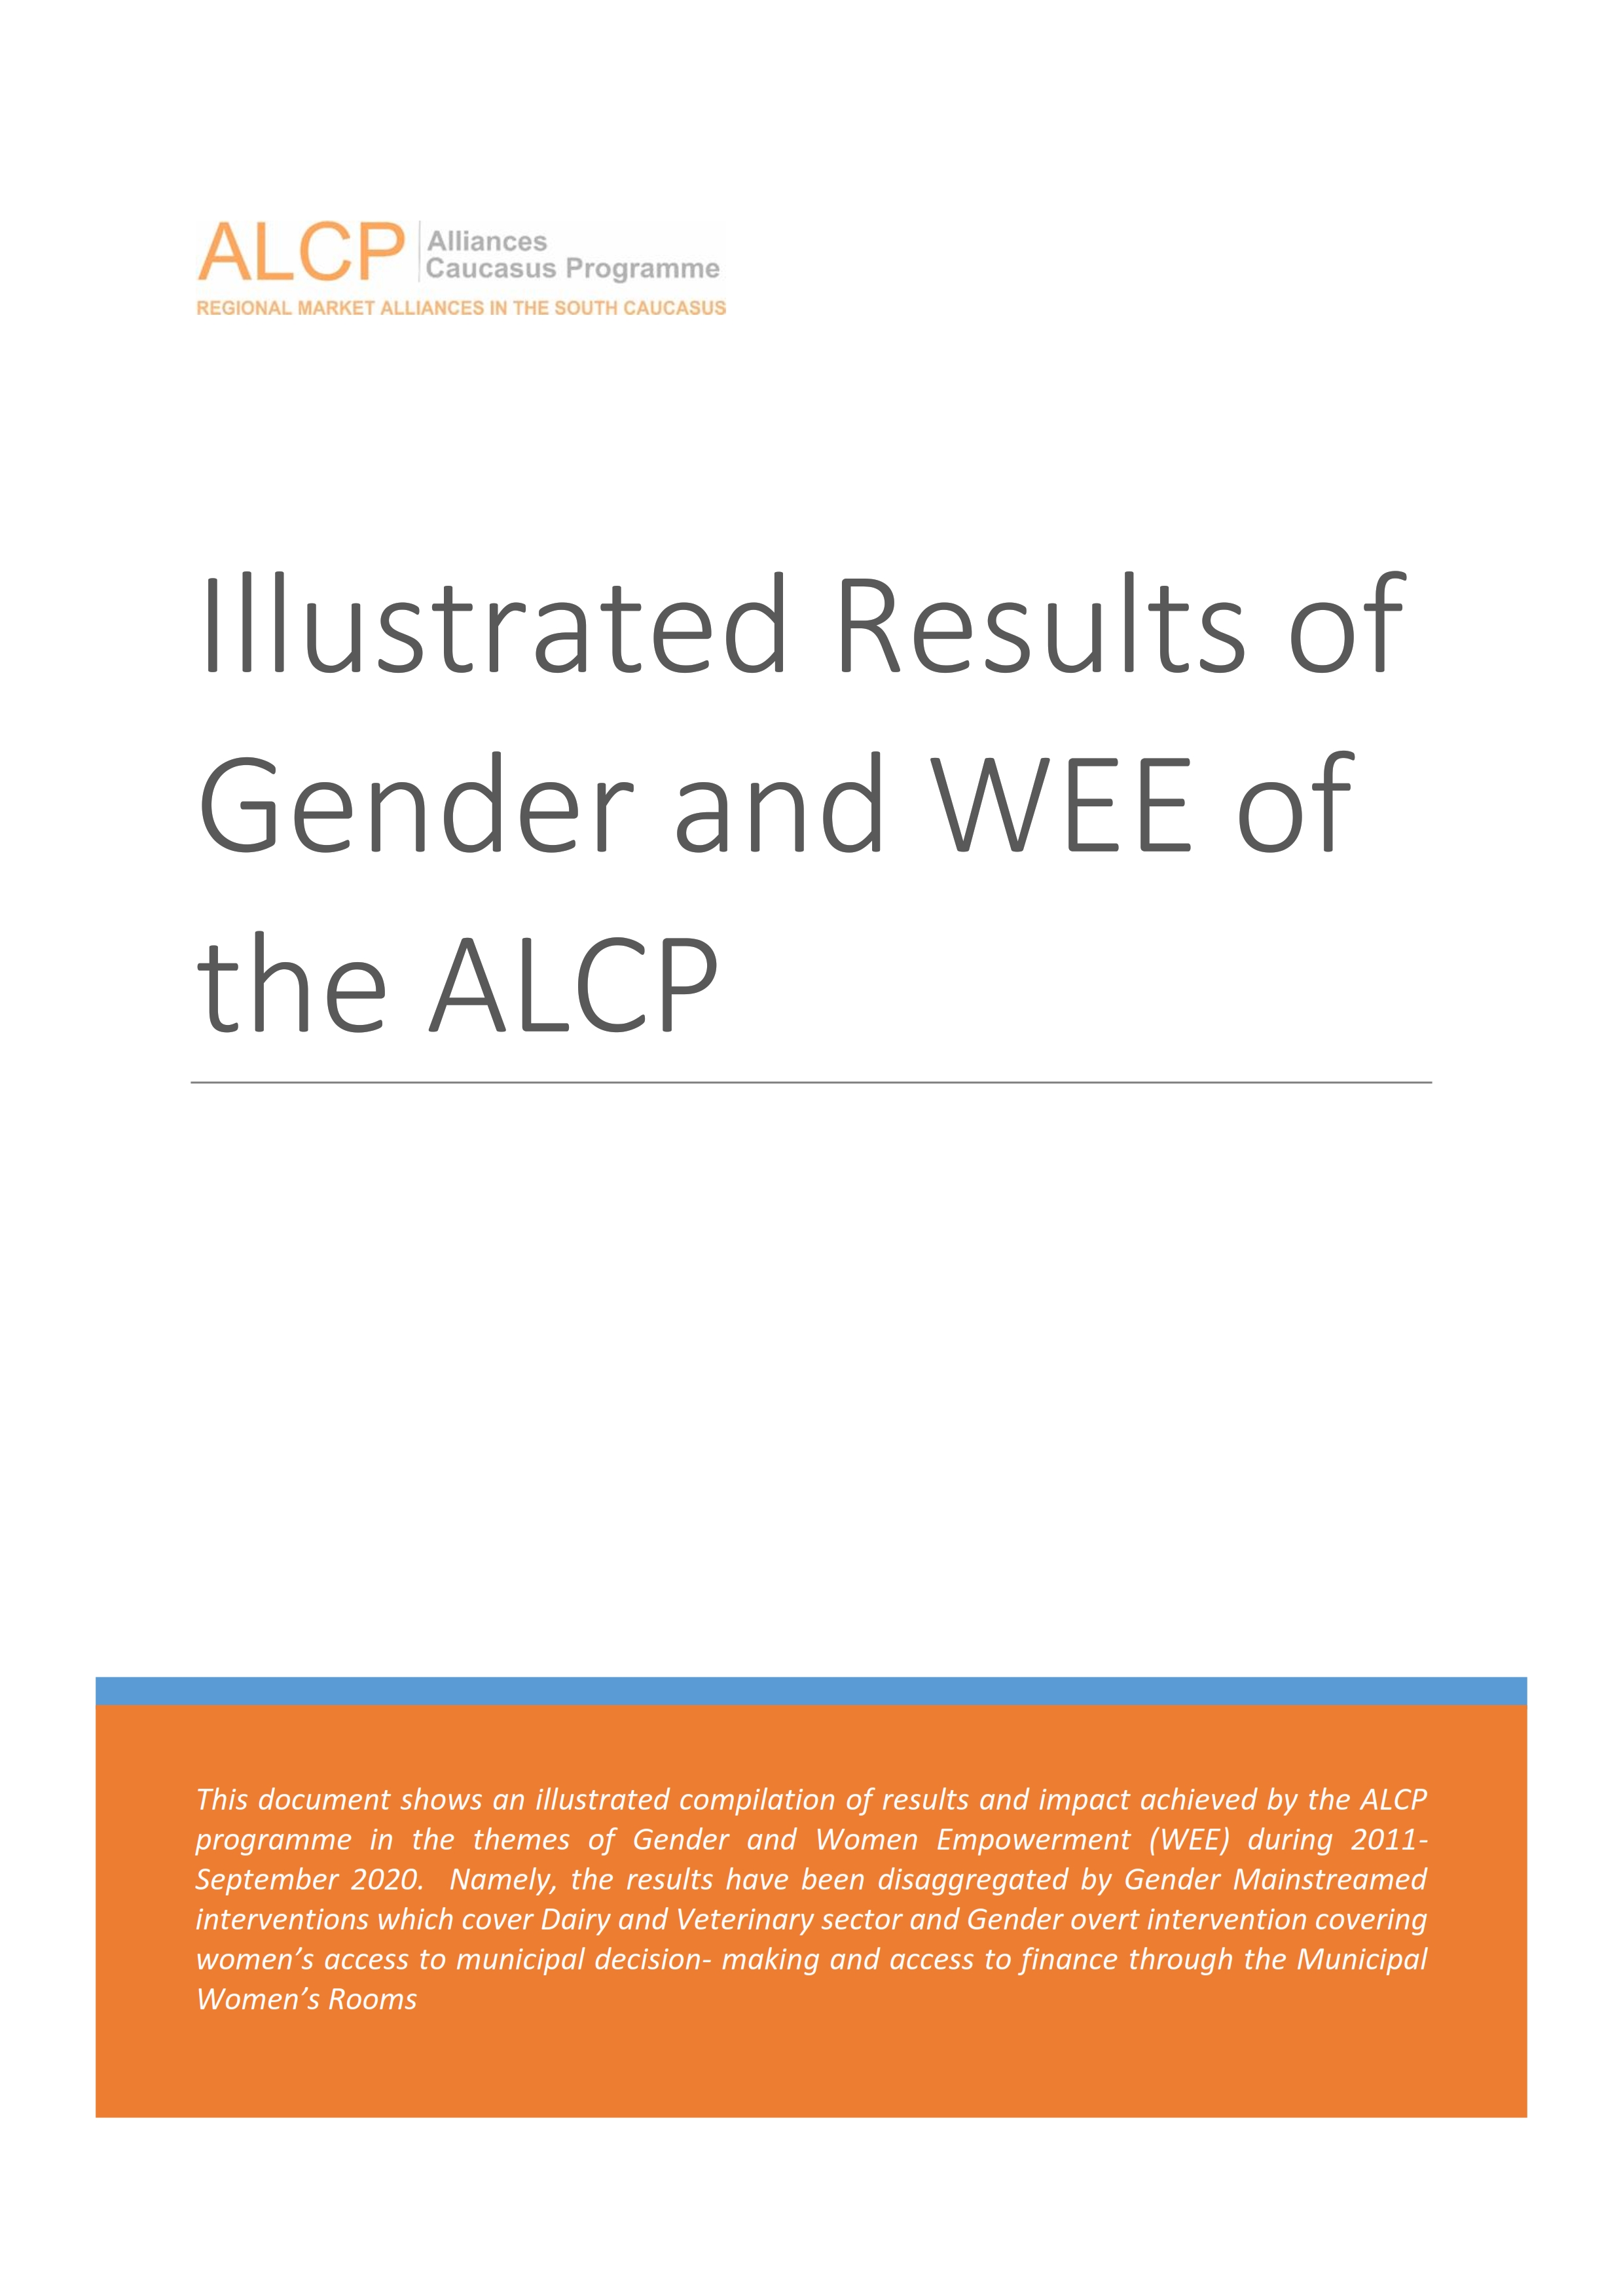 Illustrated Results of Gender and WEE of the ALCP